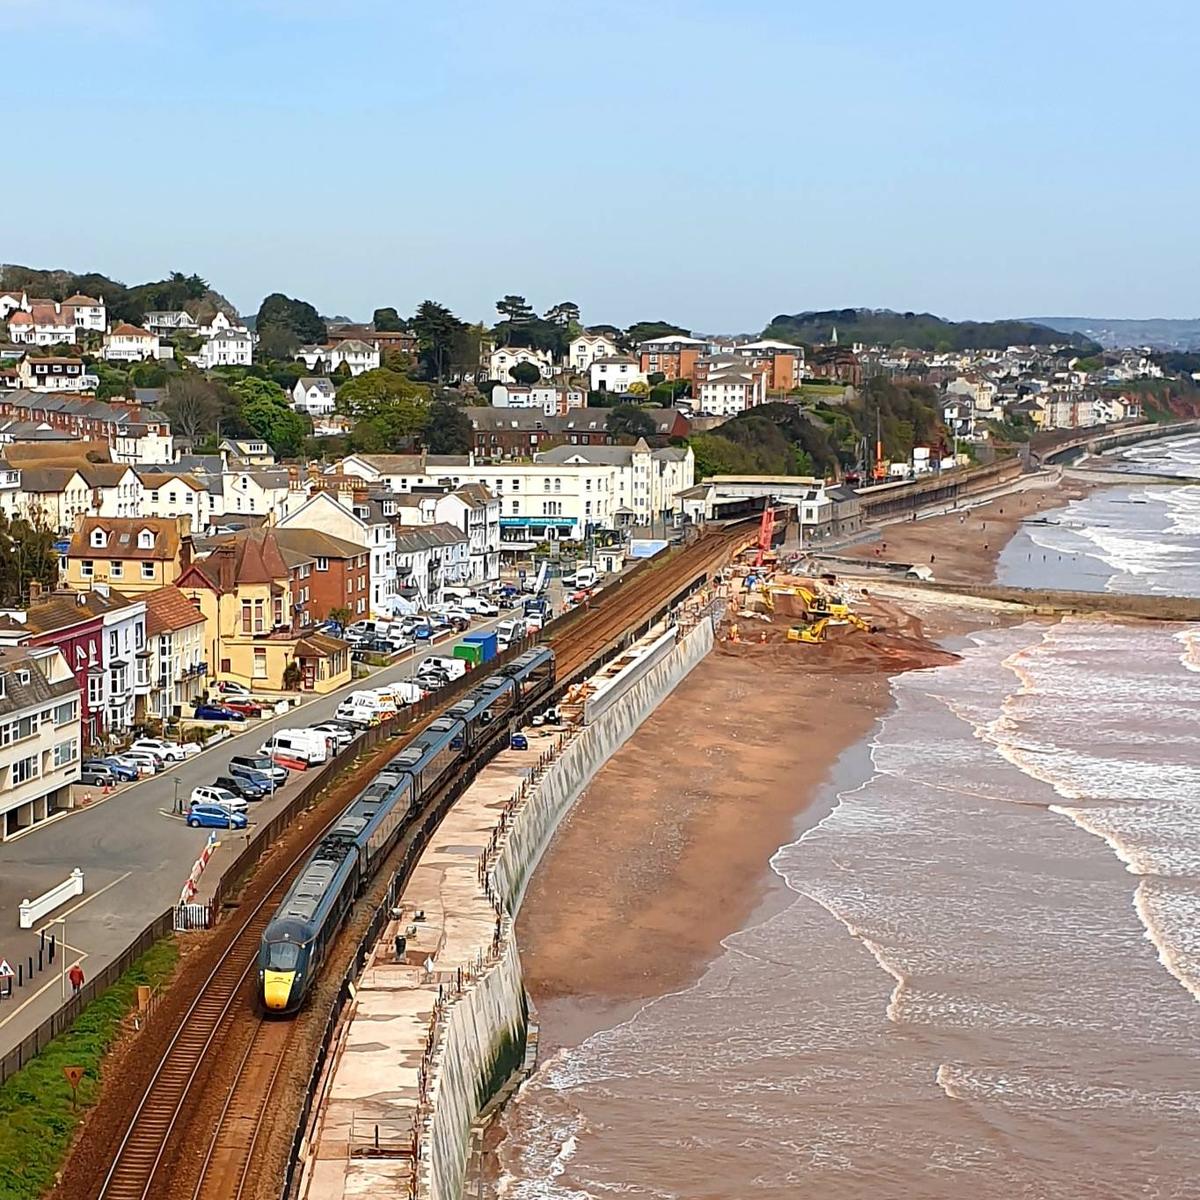 You are currently viewing Dawlish remembers the Queen | dawlish-today.co.uk